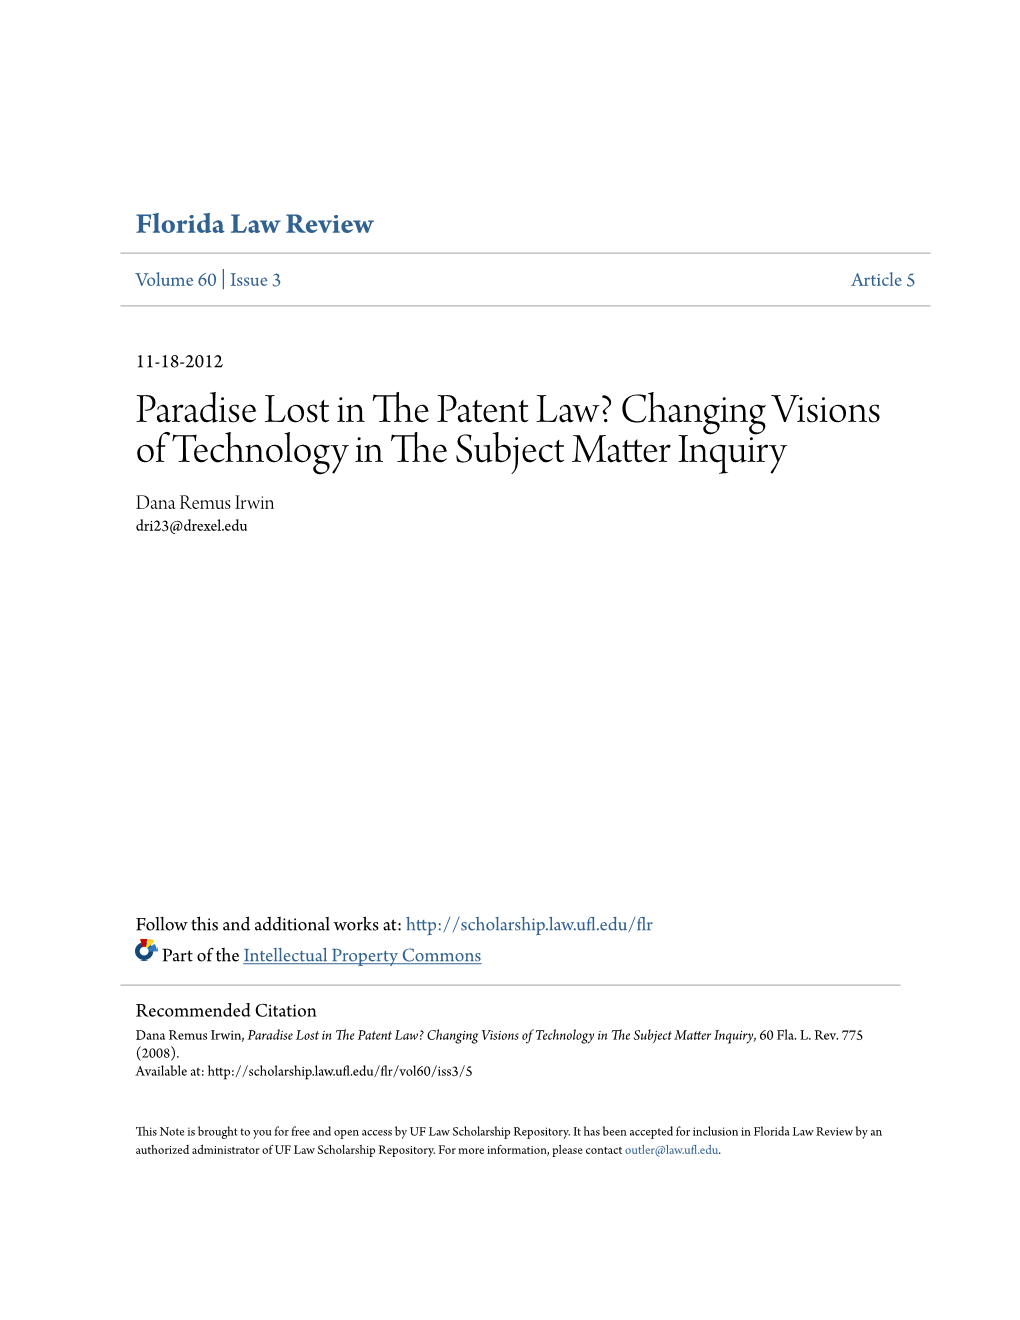 Paradise Lost in the Patent Law? Changing Visions of Technology in the Subject Matter Inquiry, 60 Fla